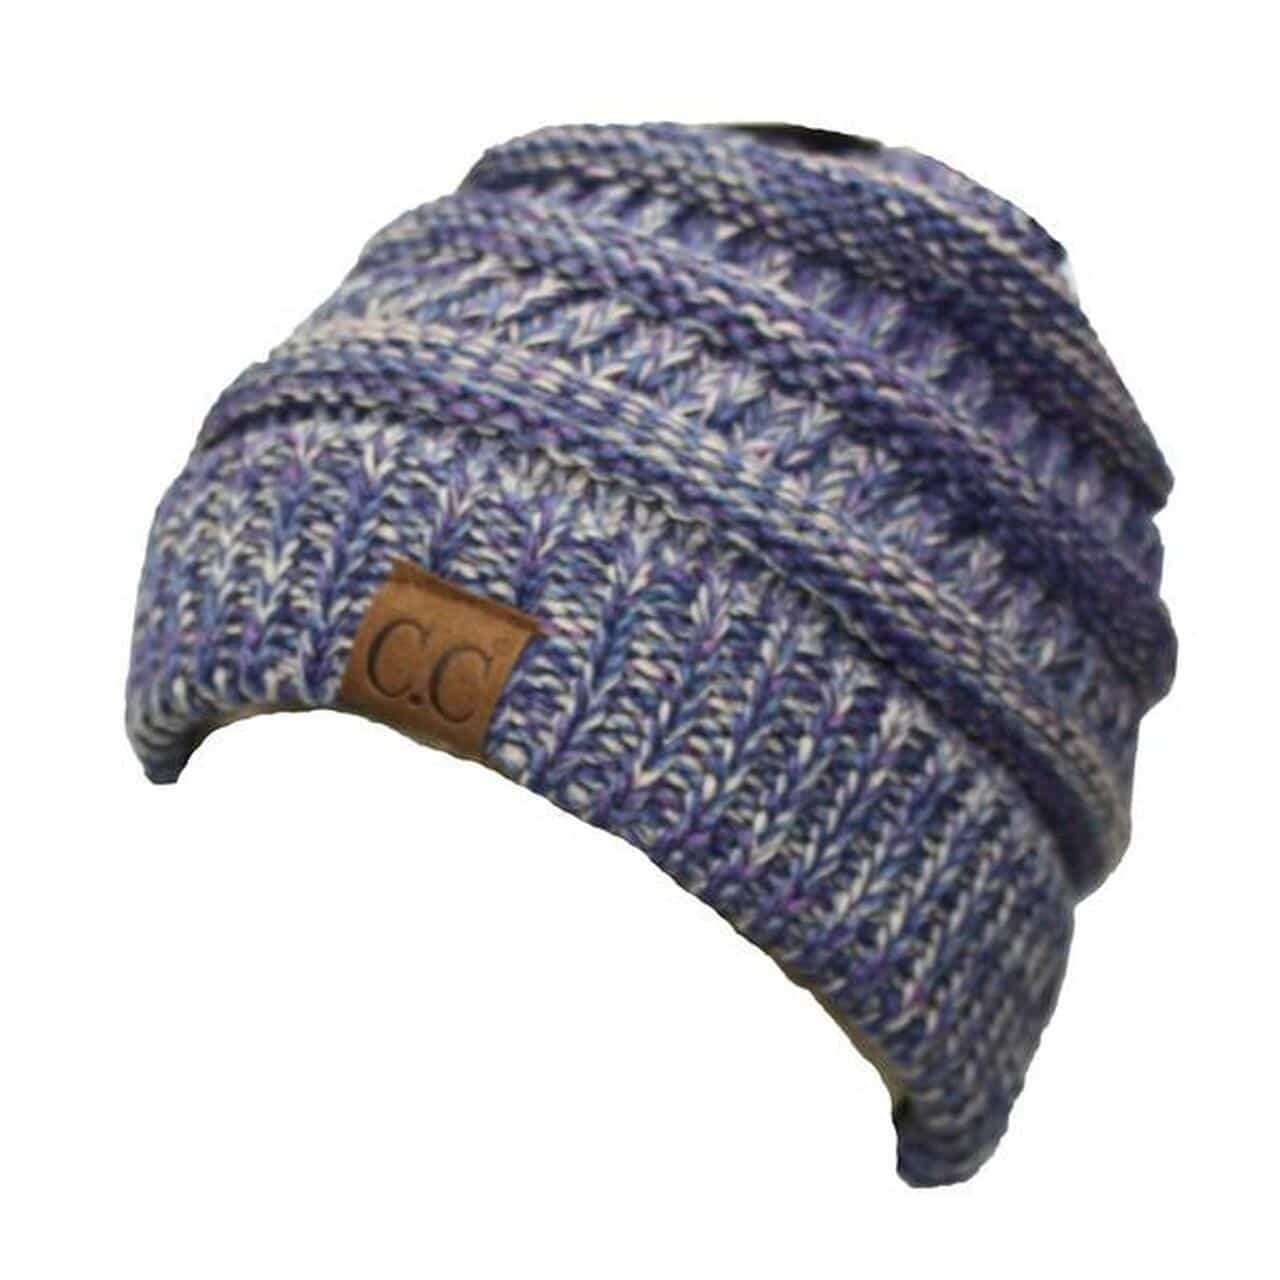 C.C. Beanie Two Toned Blue and Purple